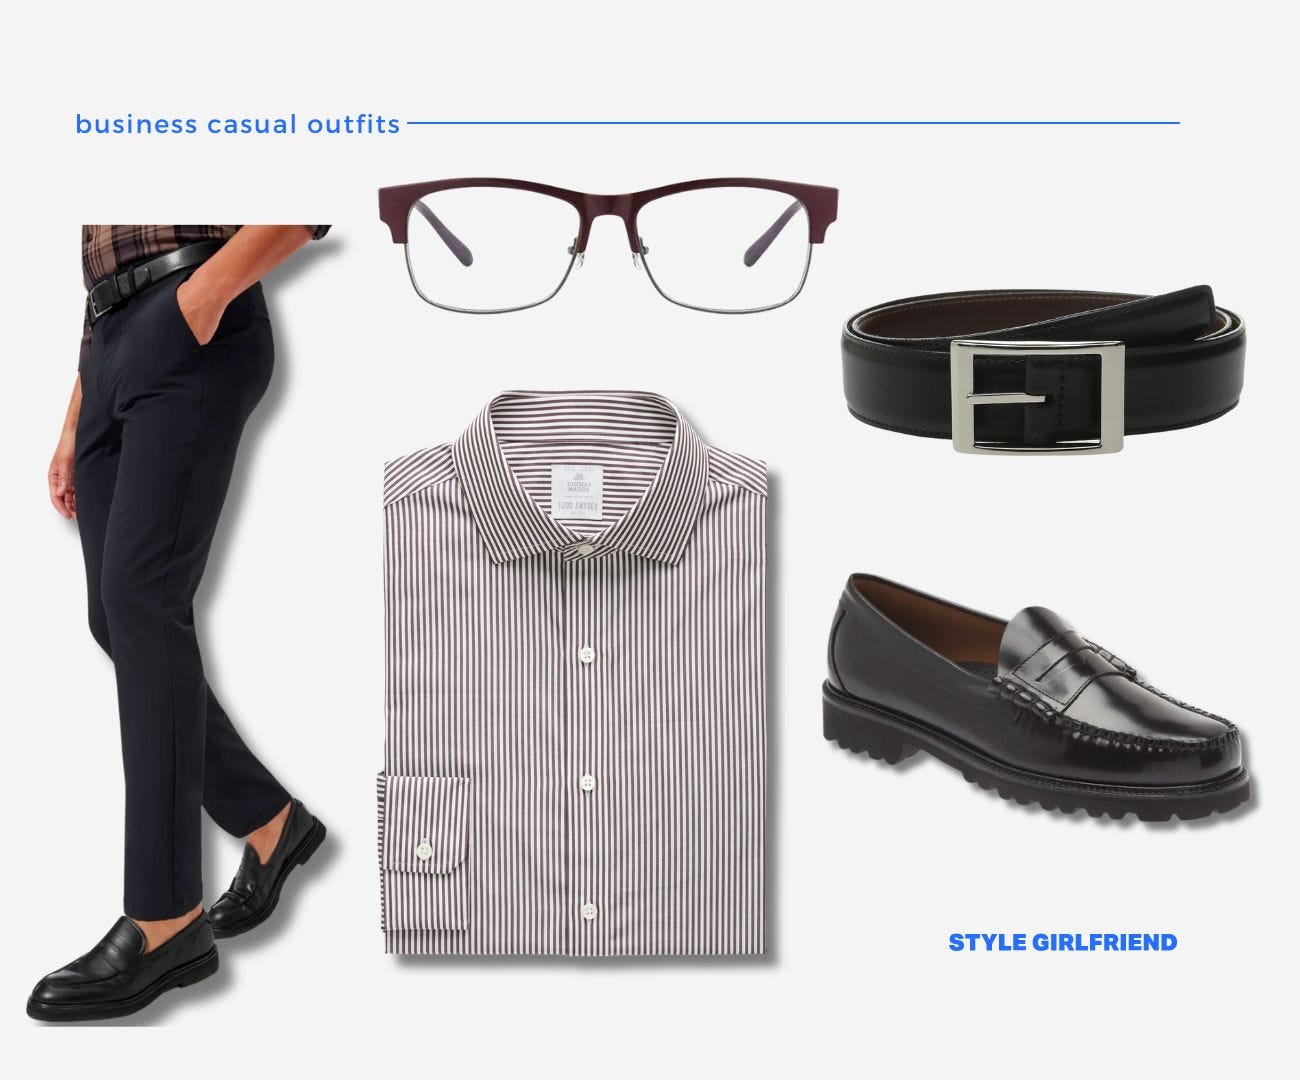 men's business casual outfit with performance dress pants and collared dress shirt